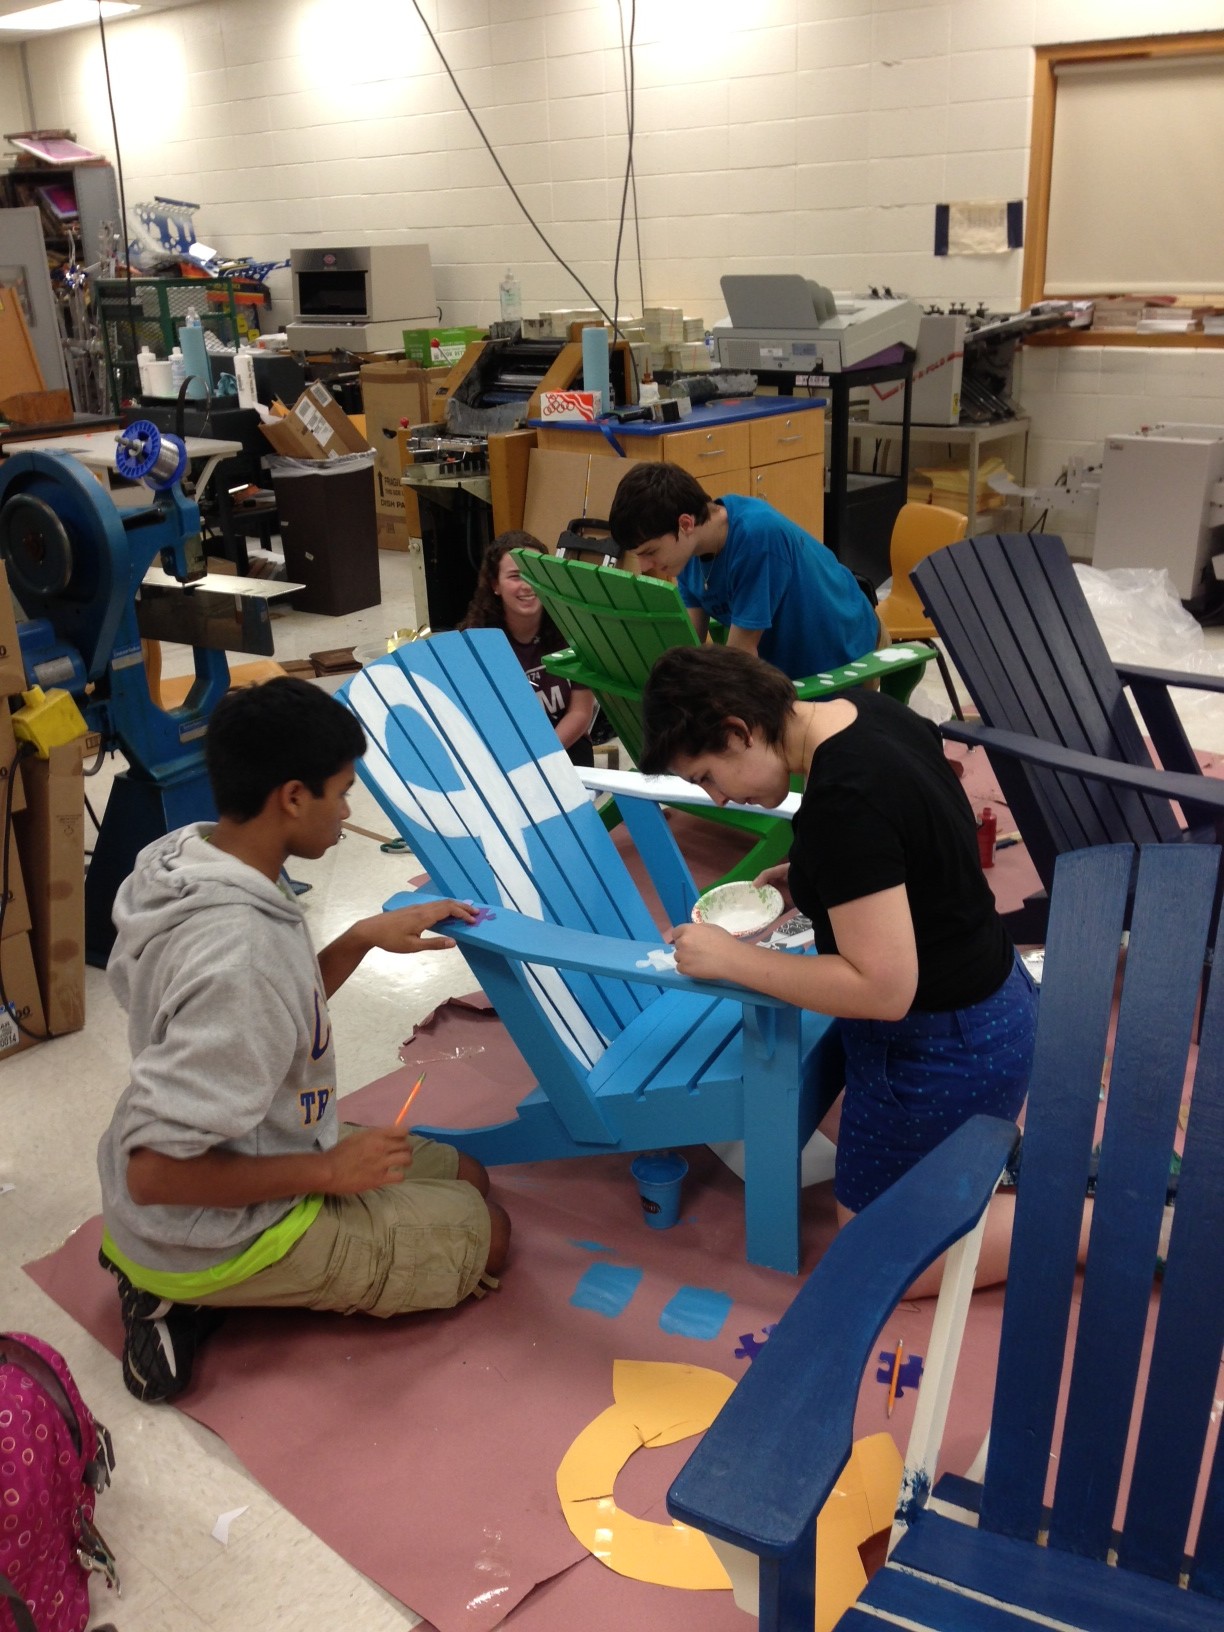 Members of the TechHOUNDS robotics club of Carmel High School work to paint the Adirondack chairs prior to the June 14 Gallery Walk. (Submitted photo)